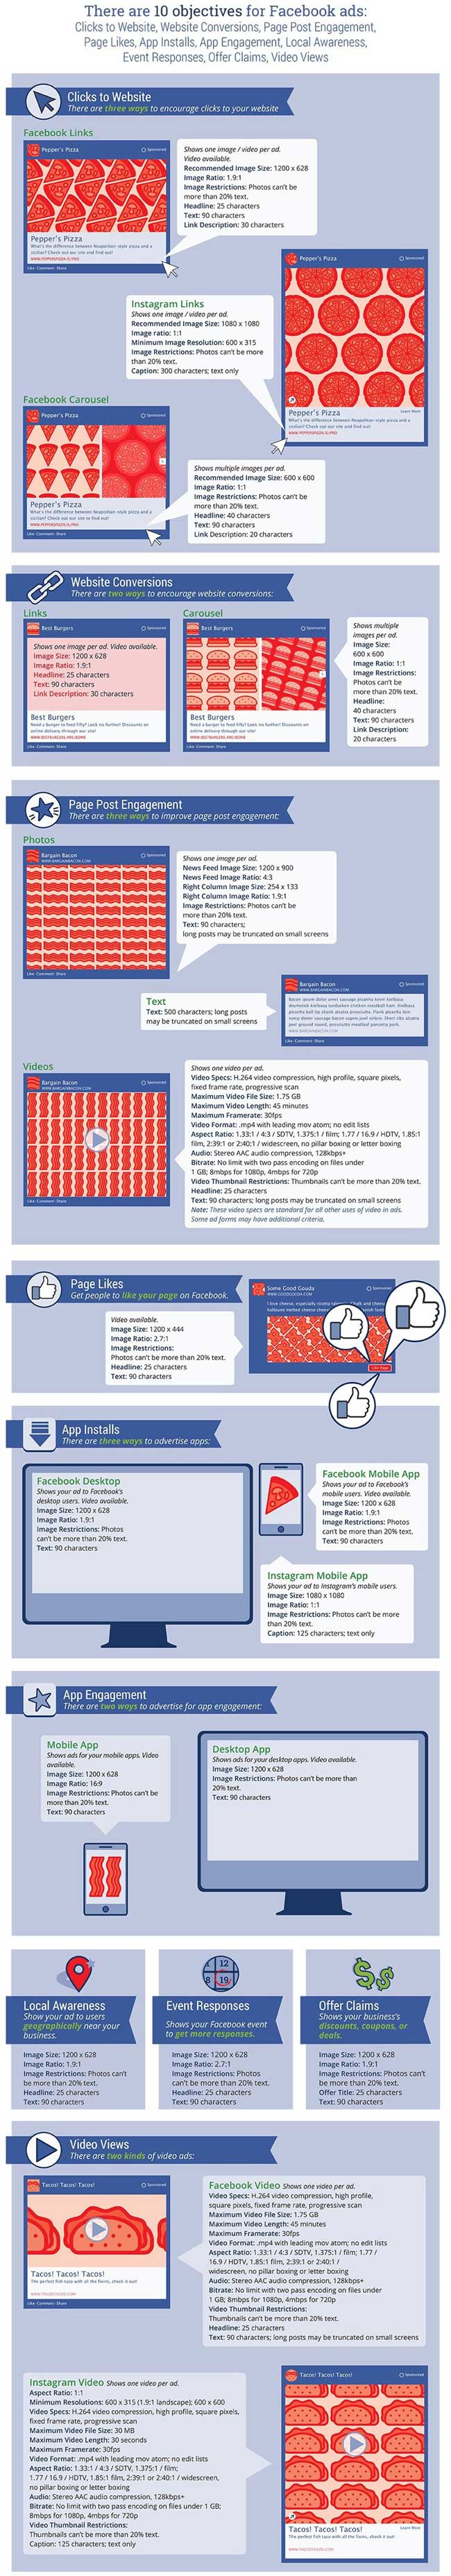 Facebook ad specifications - objectives